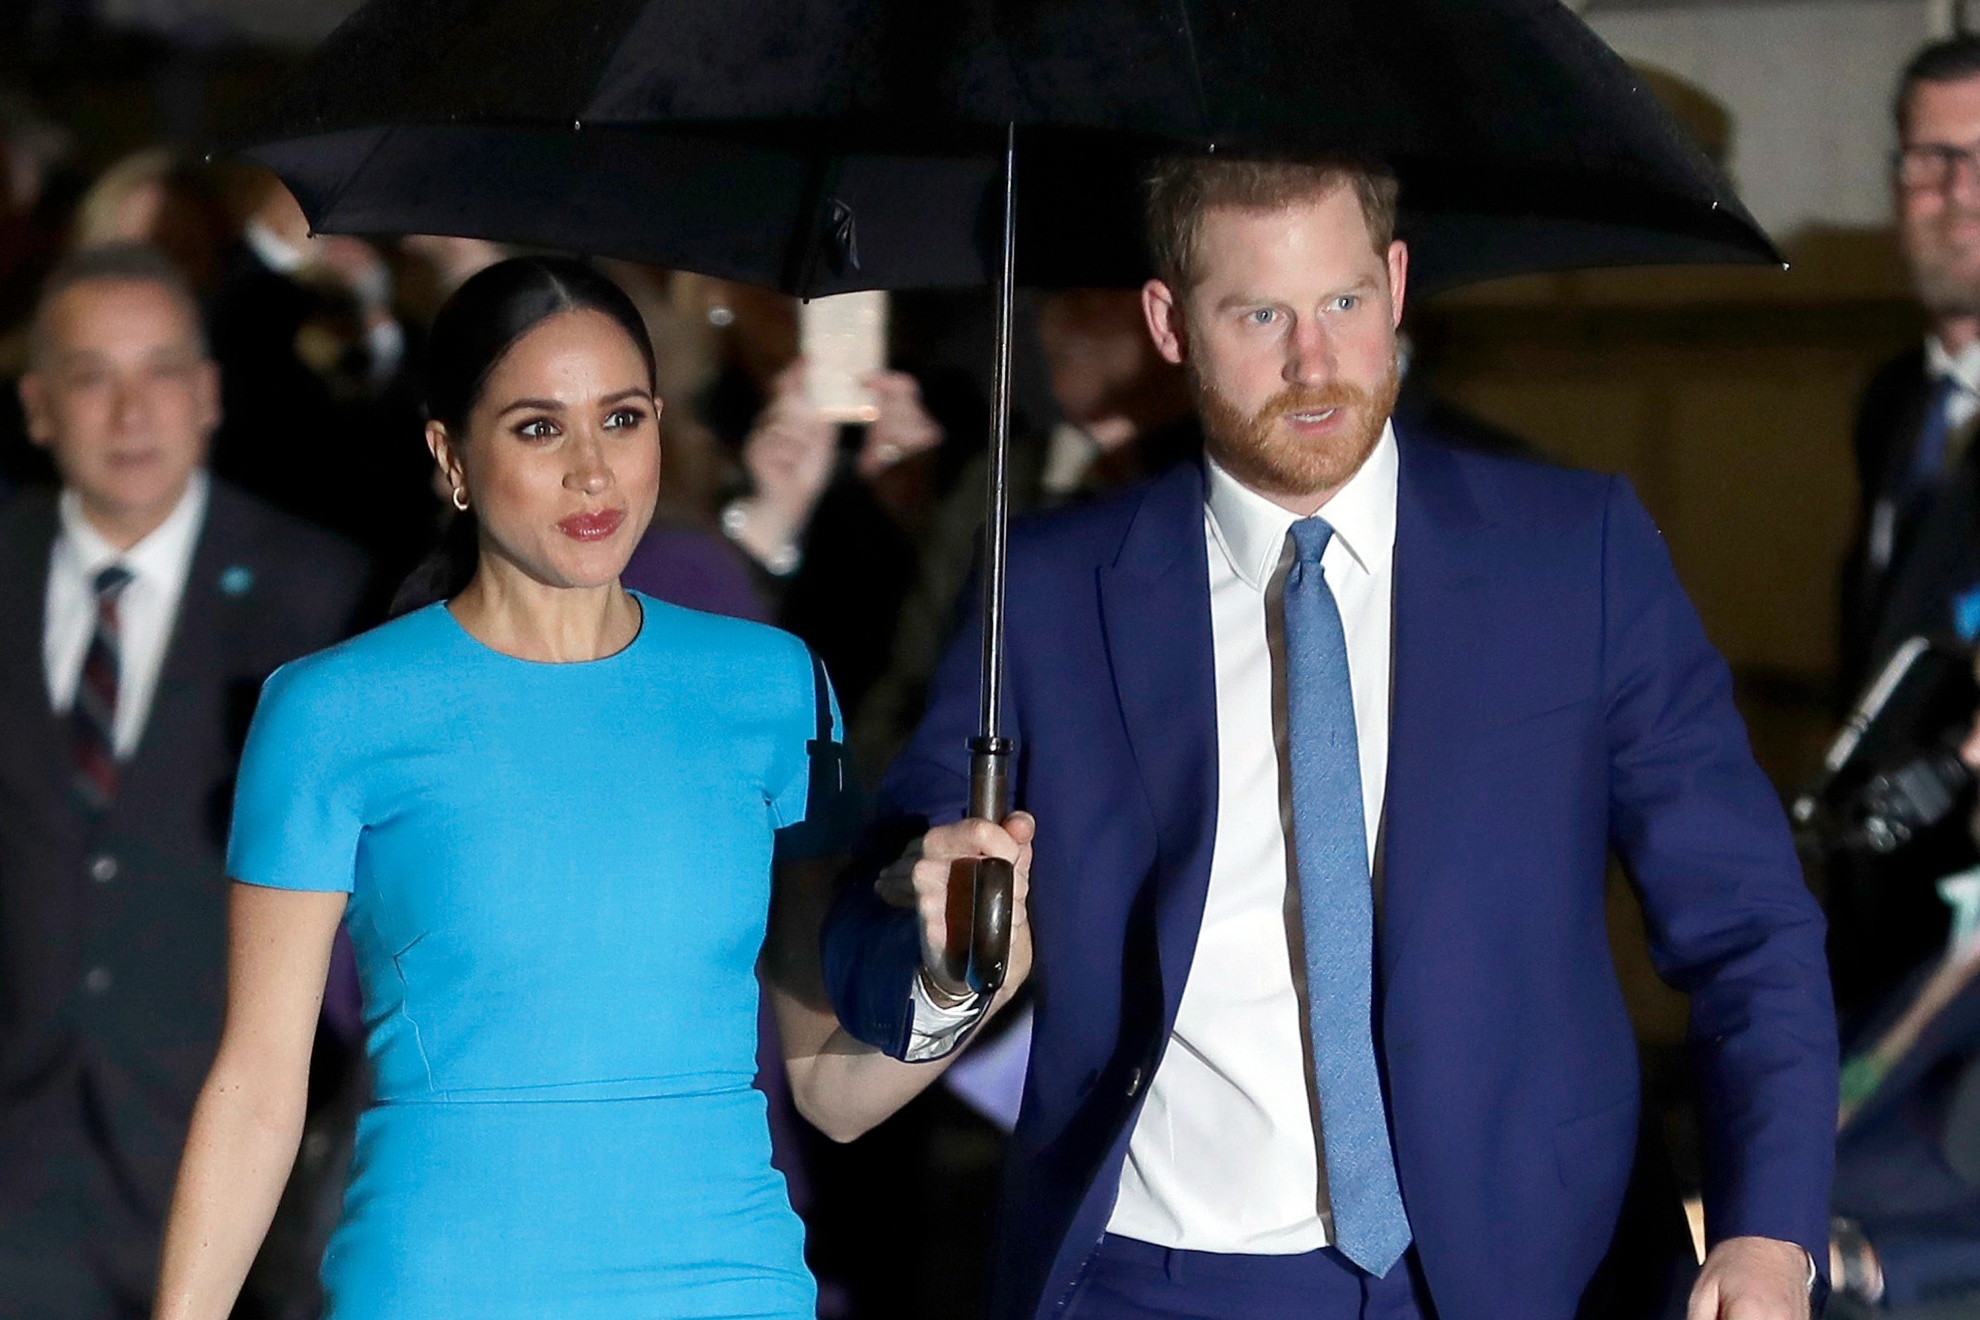 Prince Harry (right) with his wife, Meghan Markle.